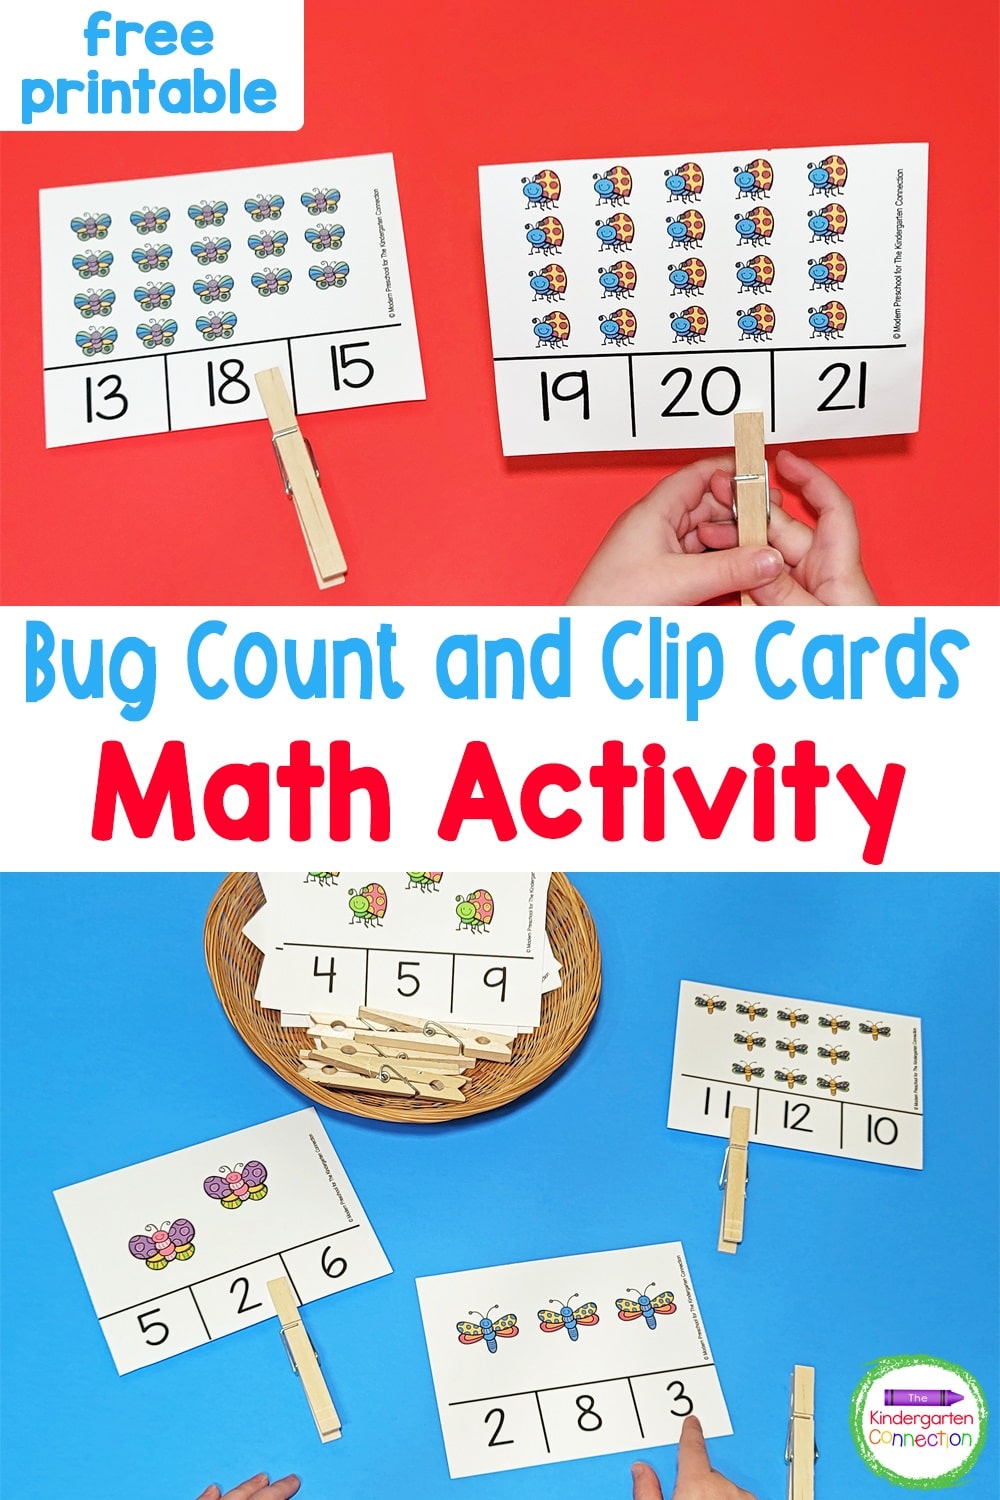 Work on counting, one-to-one correspondence, teen numbers, and fine motor skills too with these fun and free Bug Count and Clip Cards!